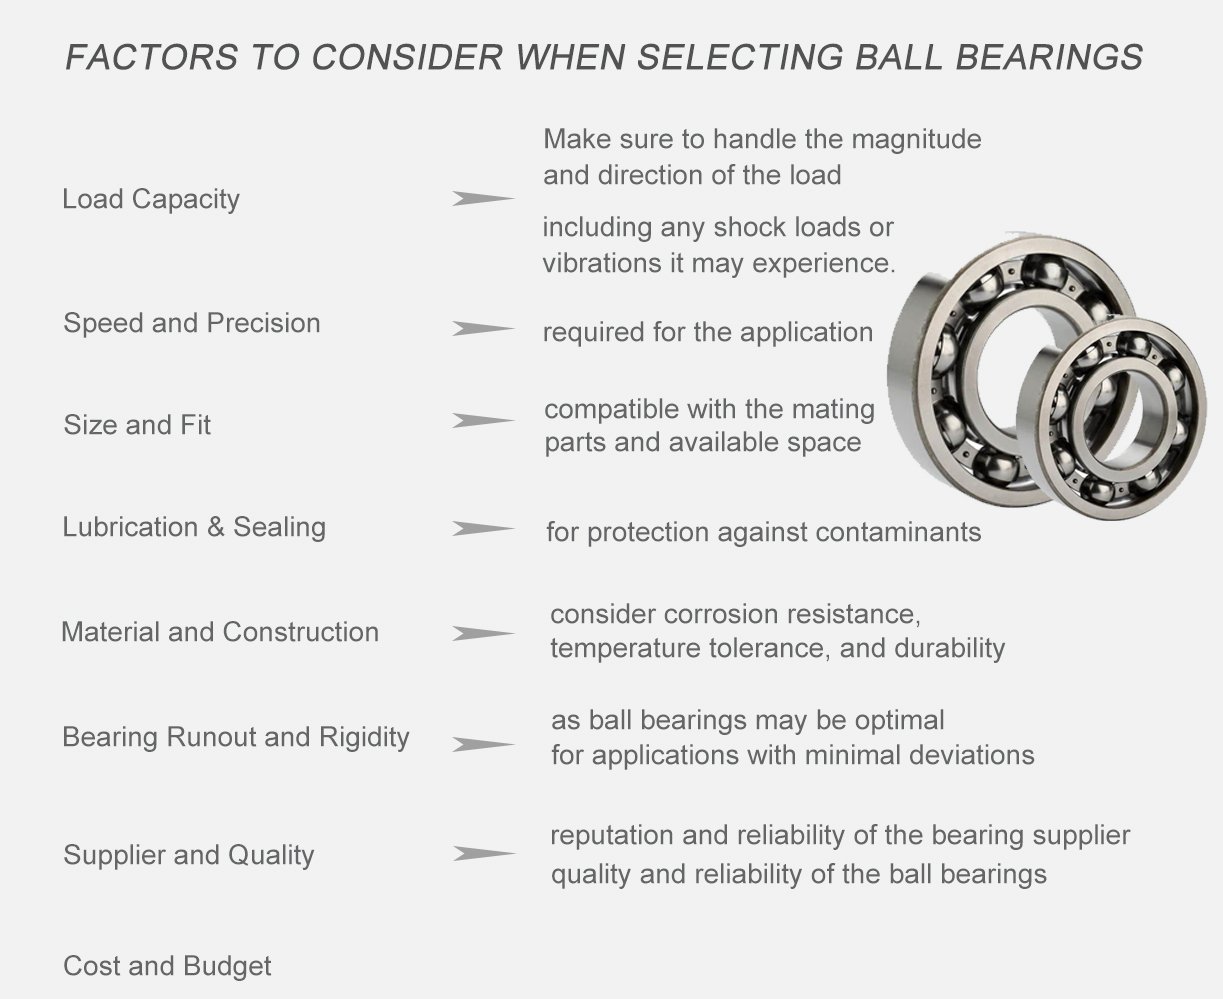 Bearing Types and Classifications